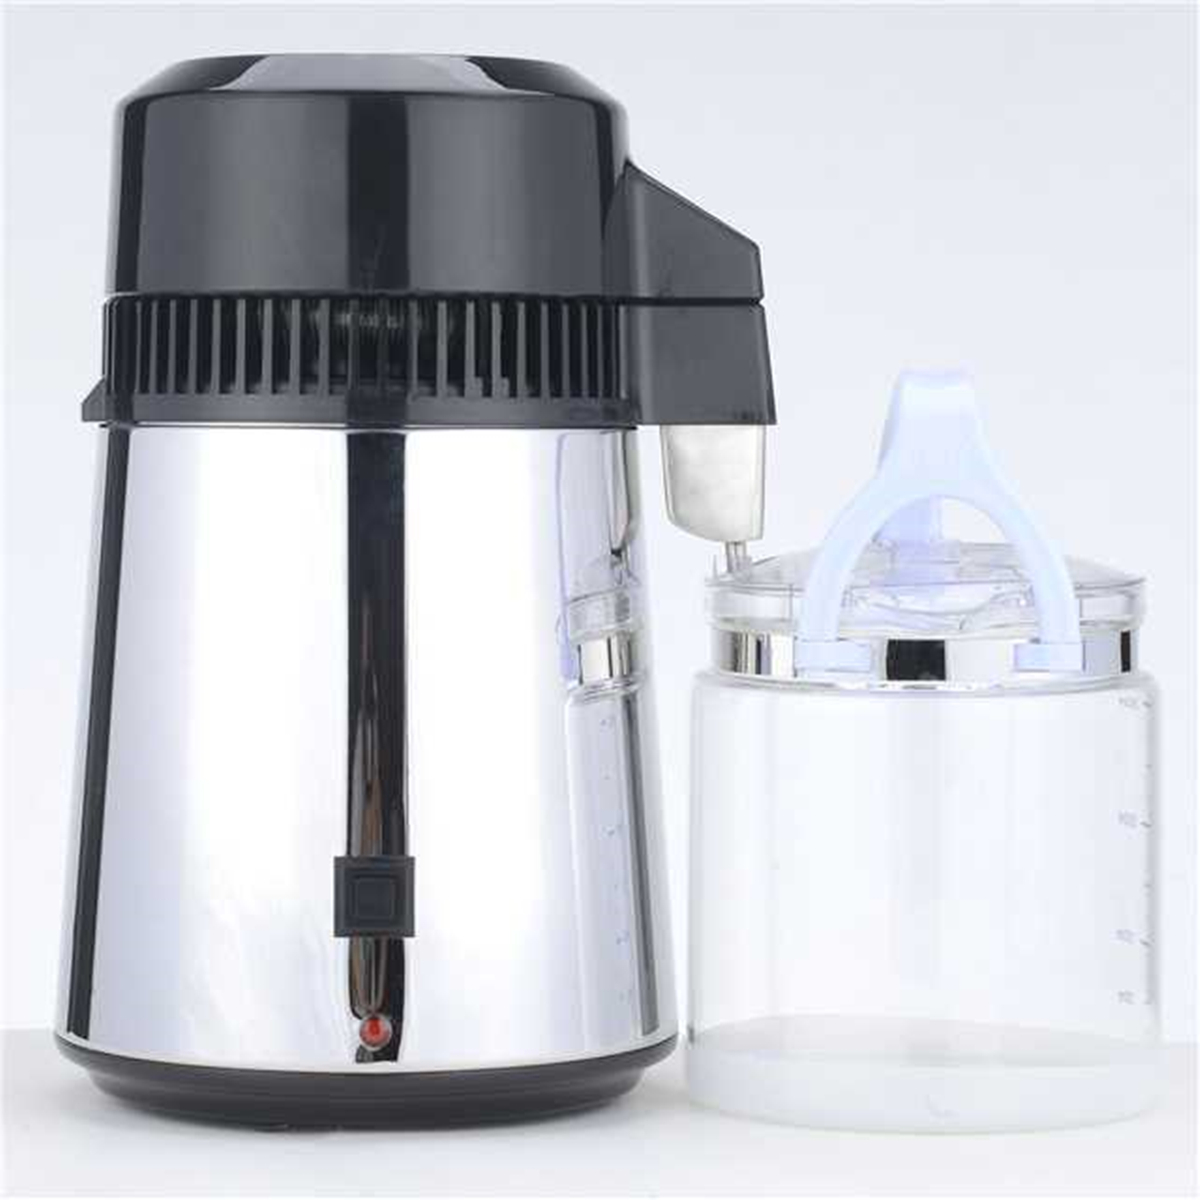 

110V 4L 304 Stainless Steel Water Distiller Pure Water Purifier Filter With Glass Jar Home Use